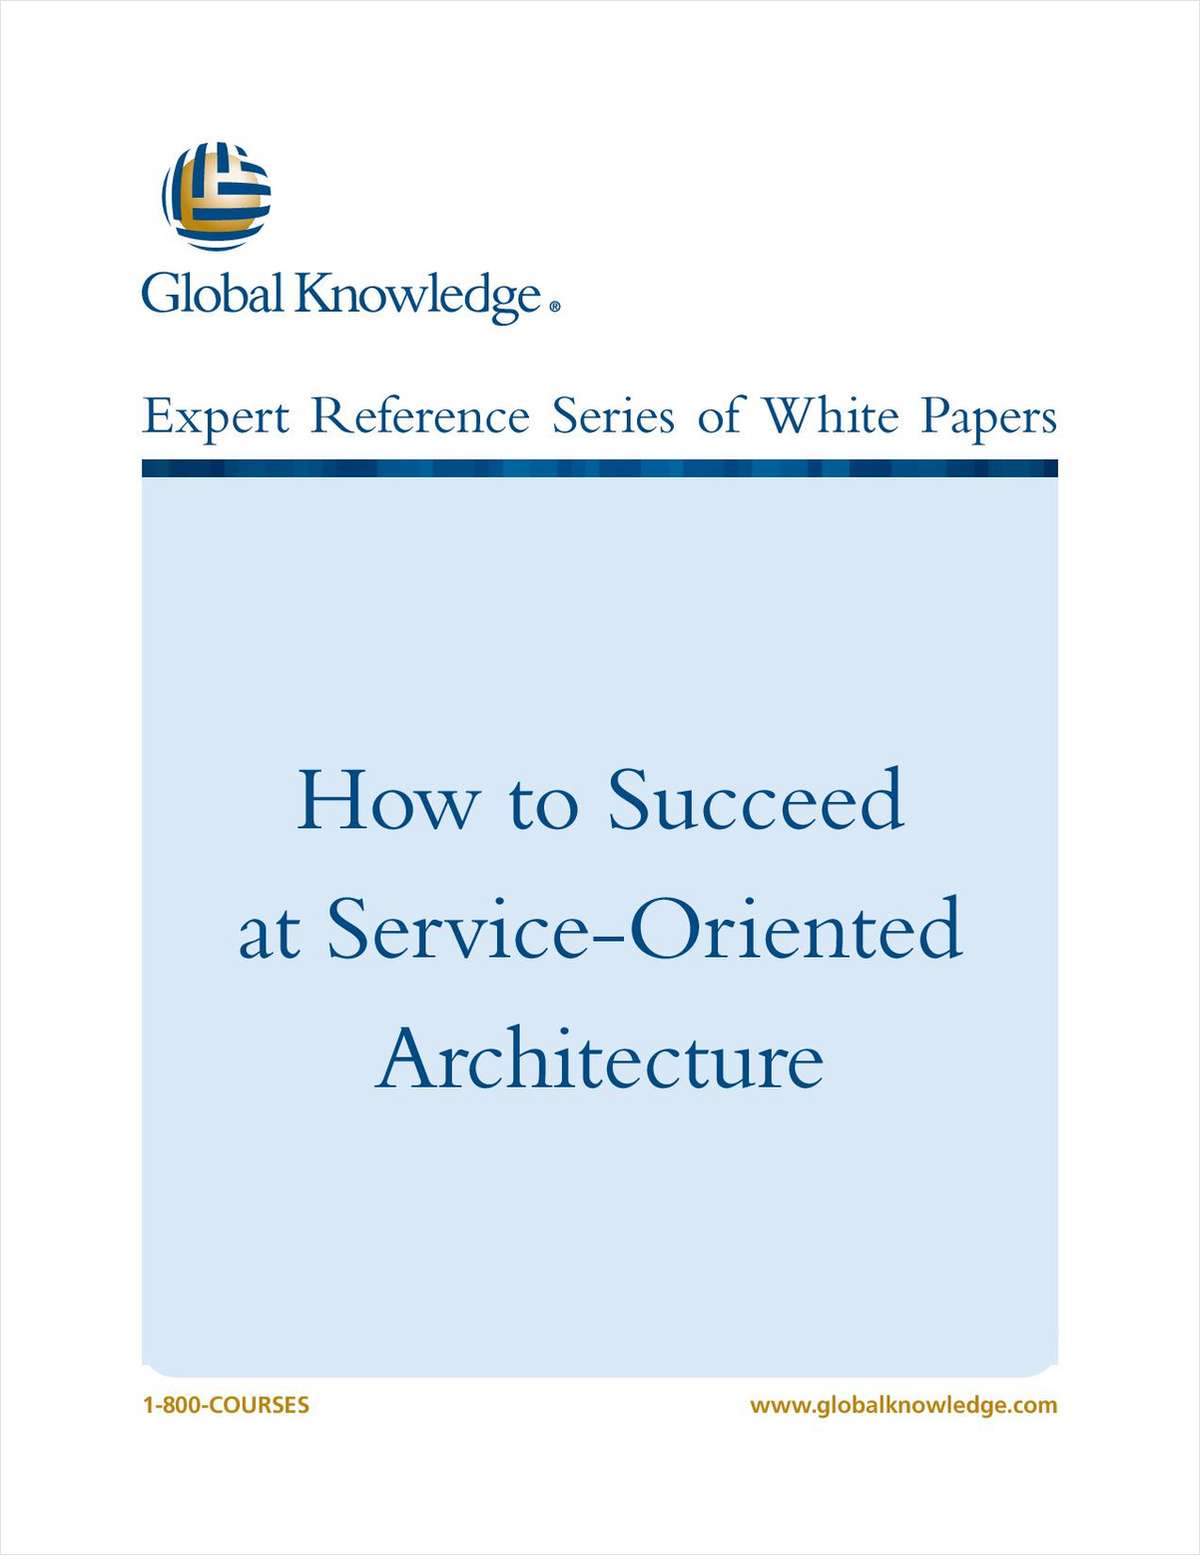 Term paper the service-oriented architecture